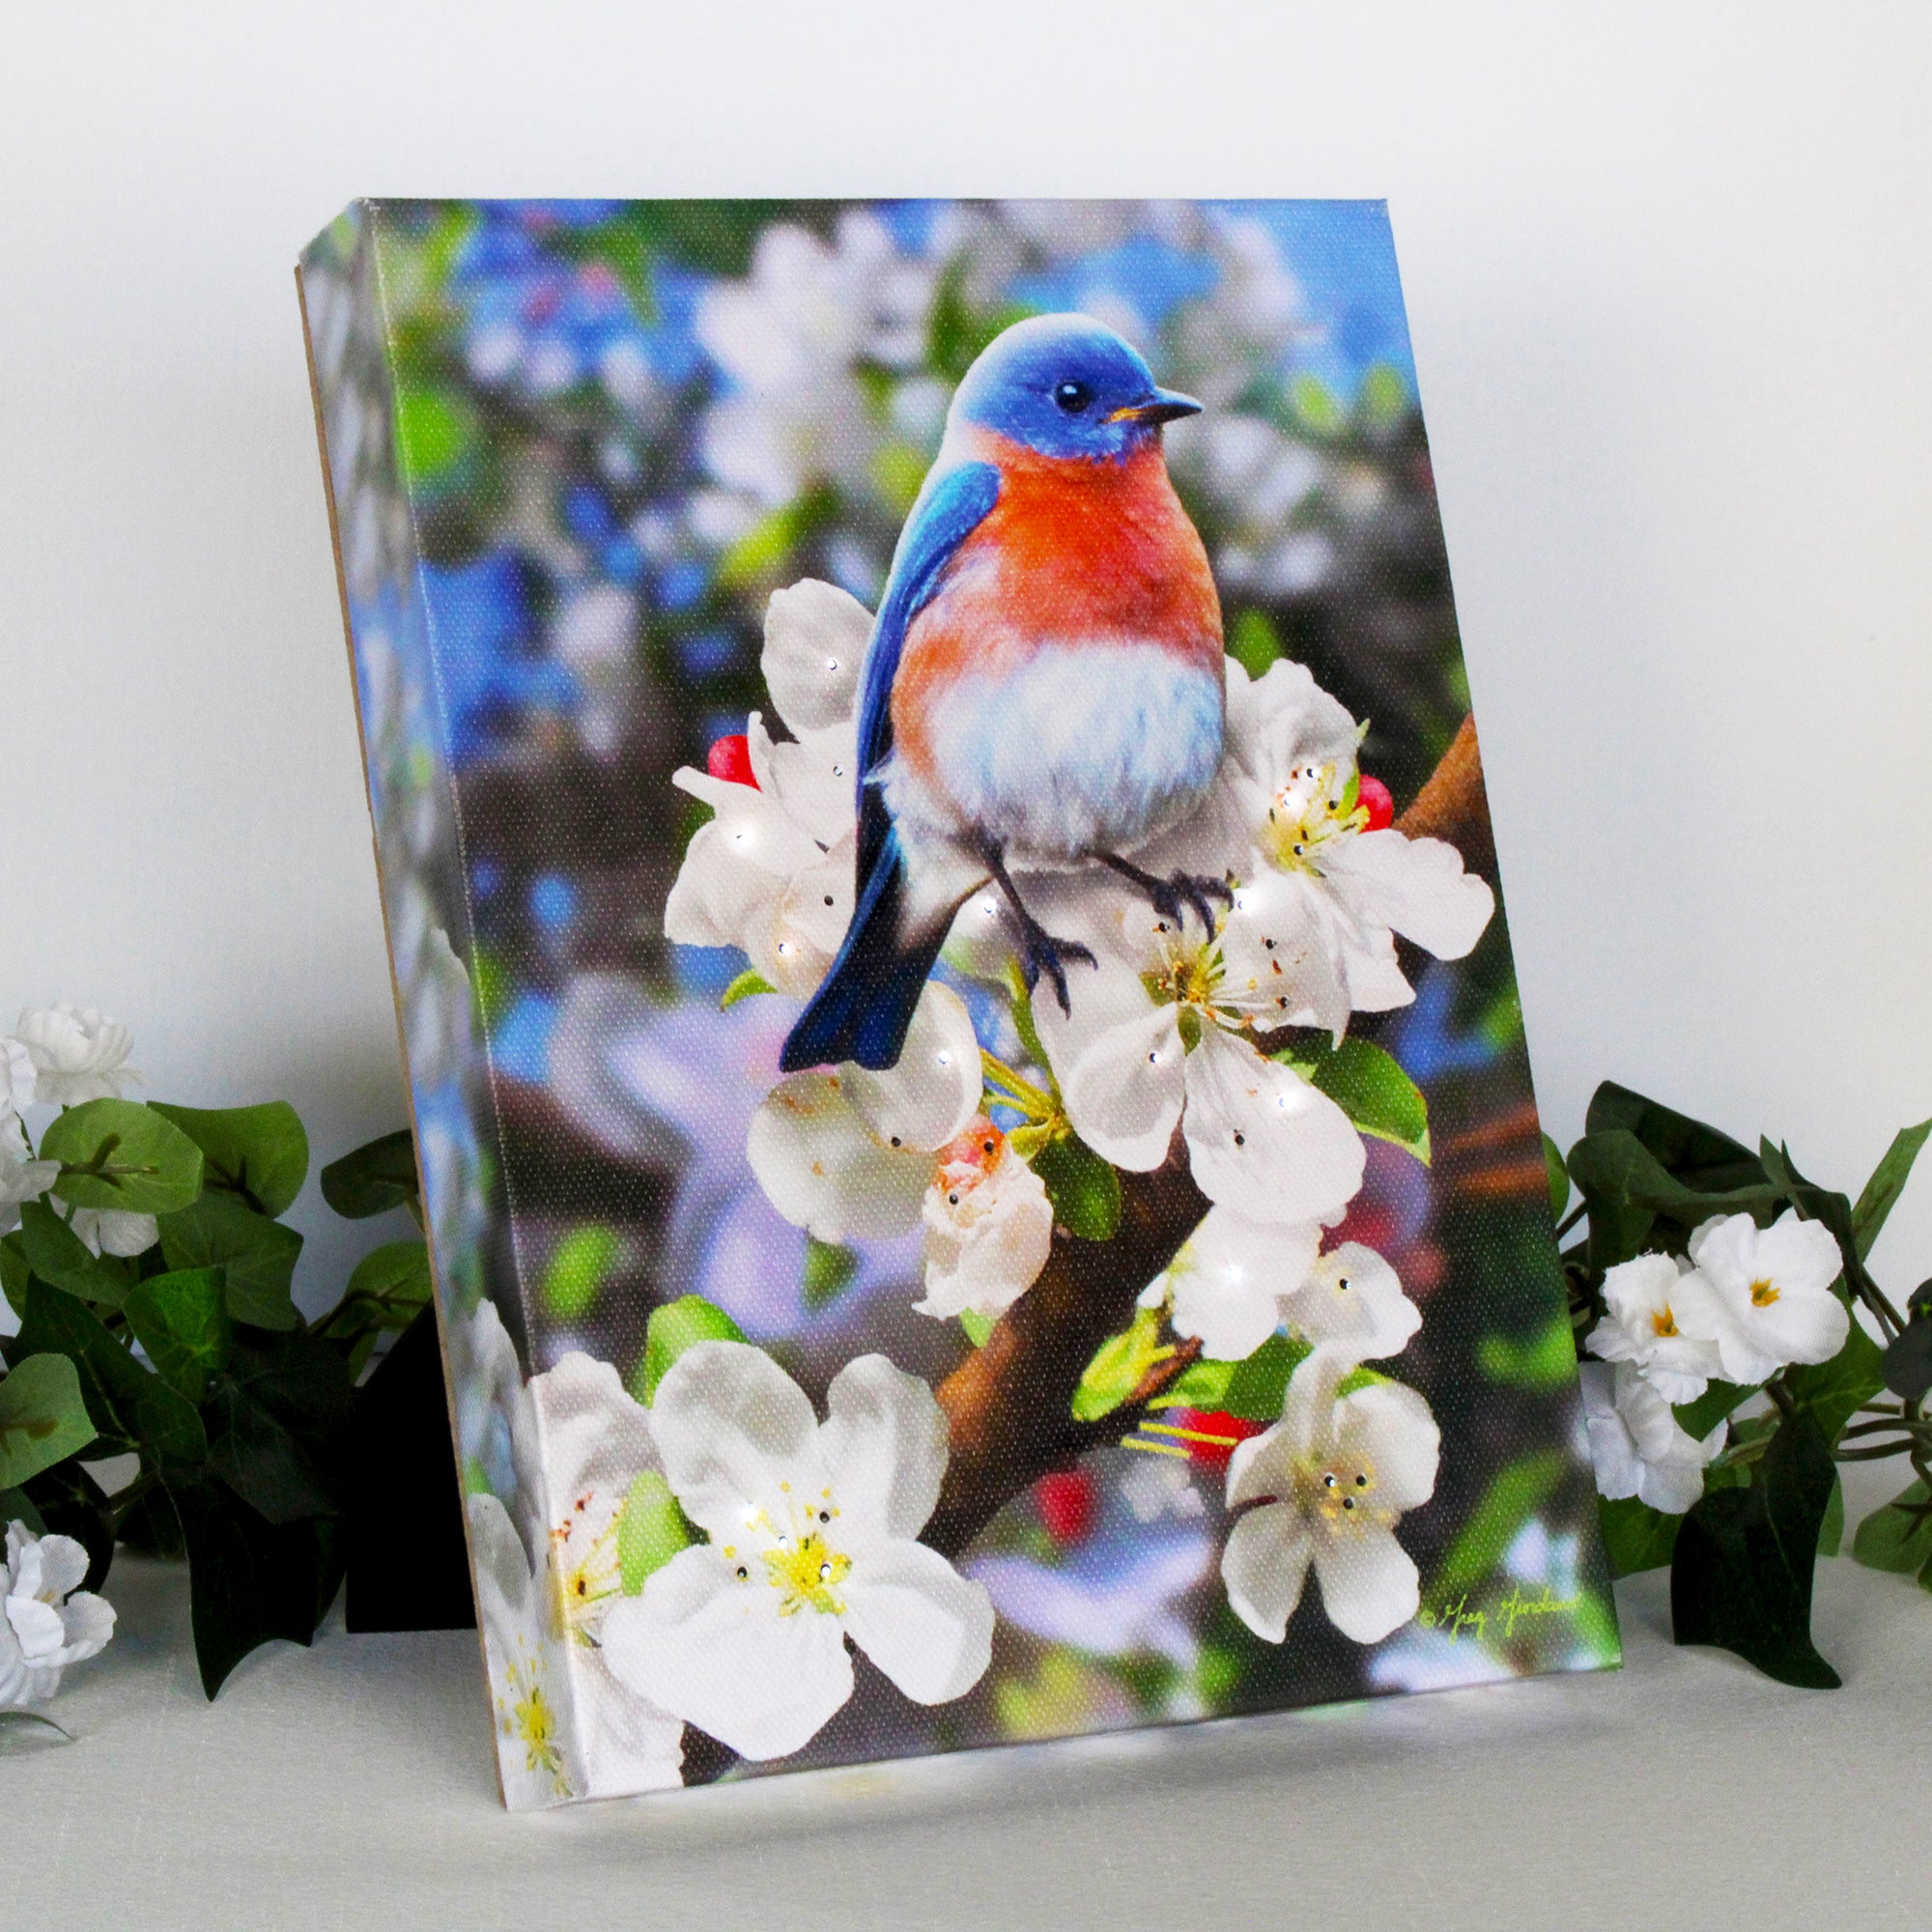 Featuring a delicate bluebird perched on a blooming branch, this enchanting piece will capture your heart and add a touch of elegance to any room.